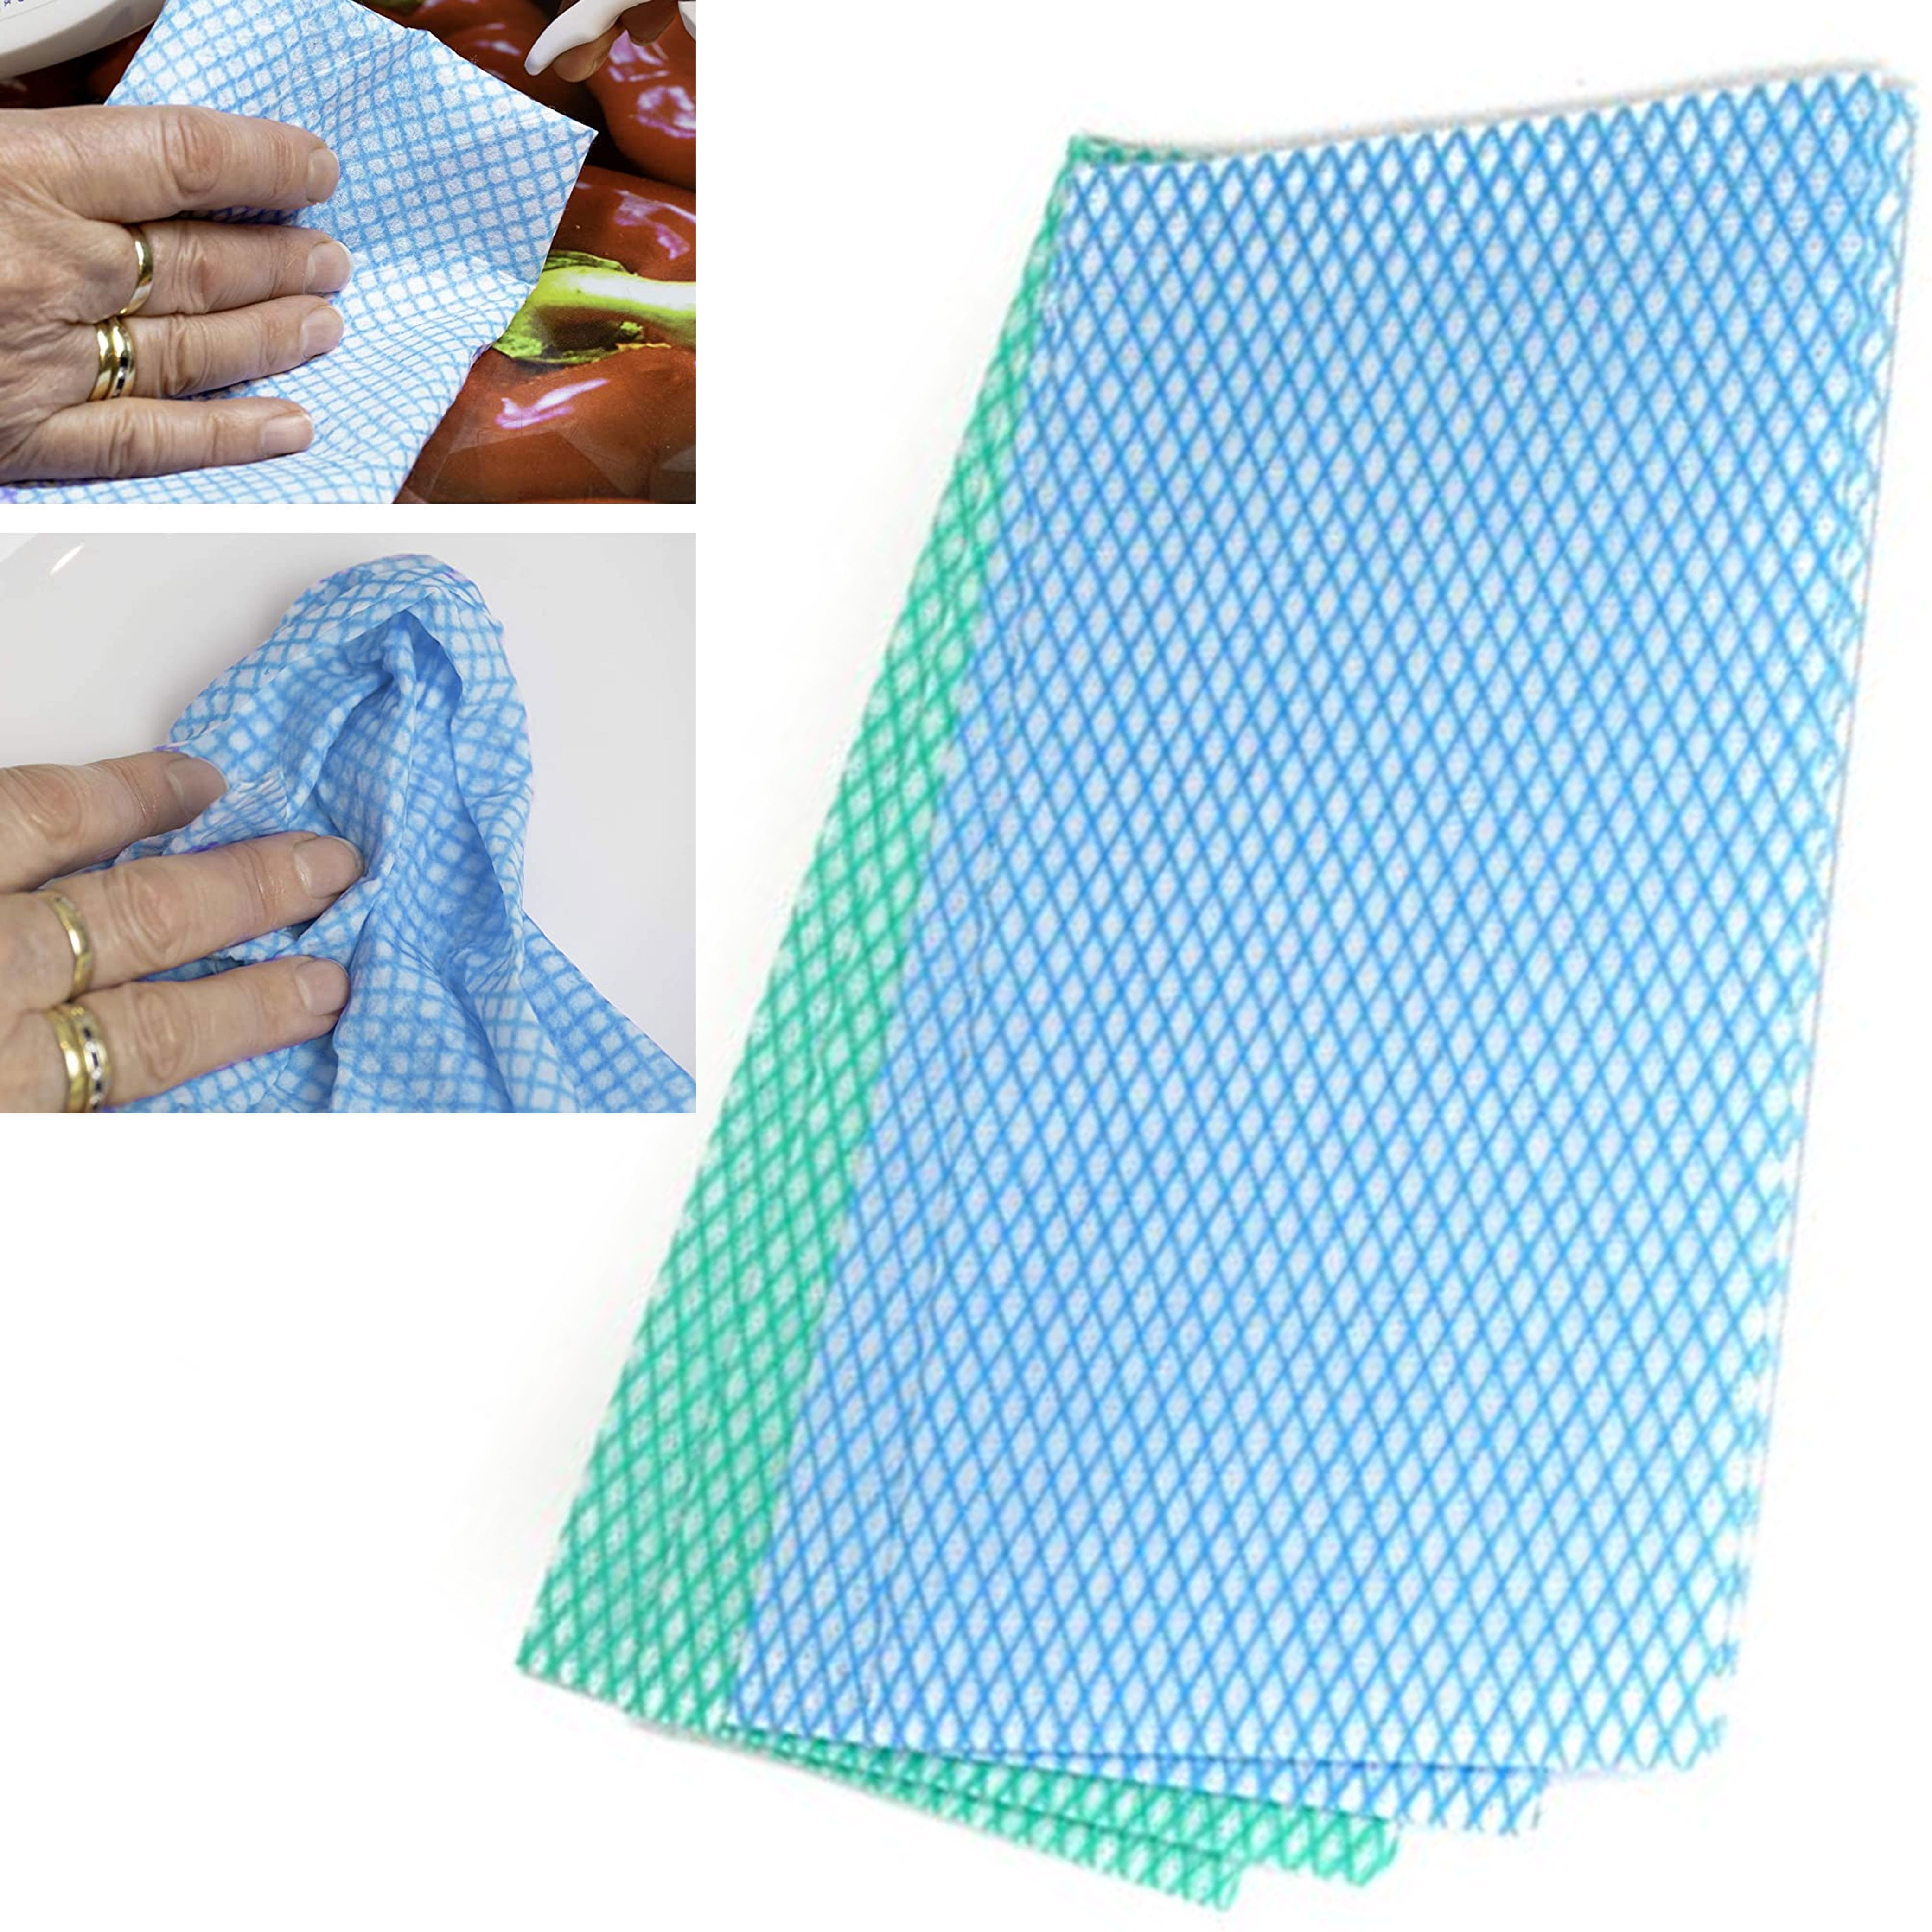 80pc/bag Non-woven Kitchen Washing Cleaning Towel Dish Cloth